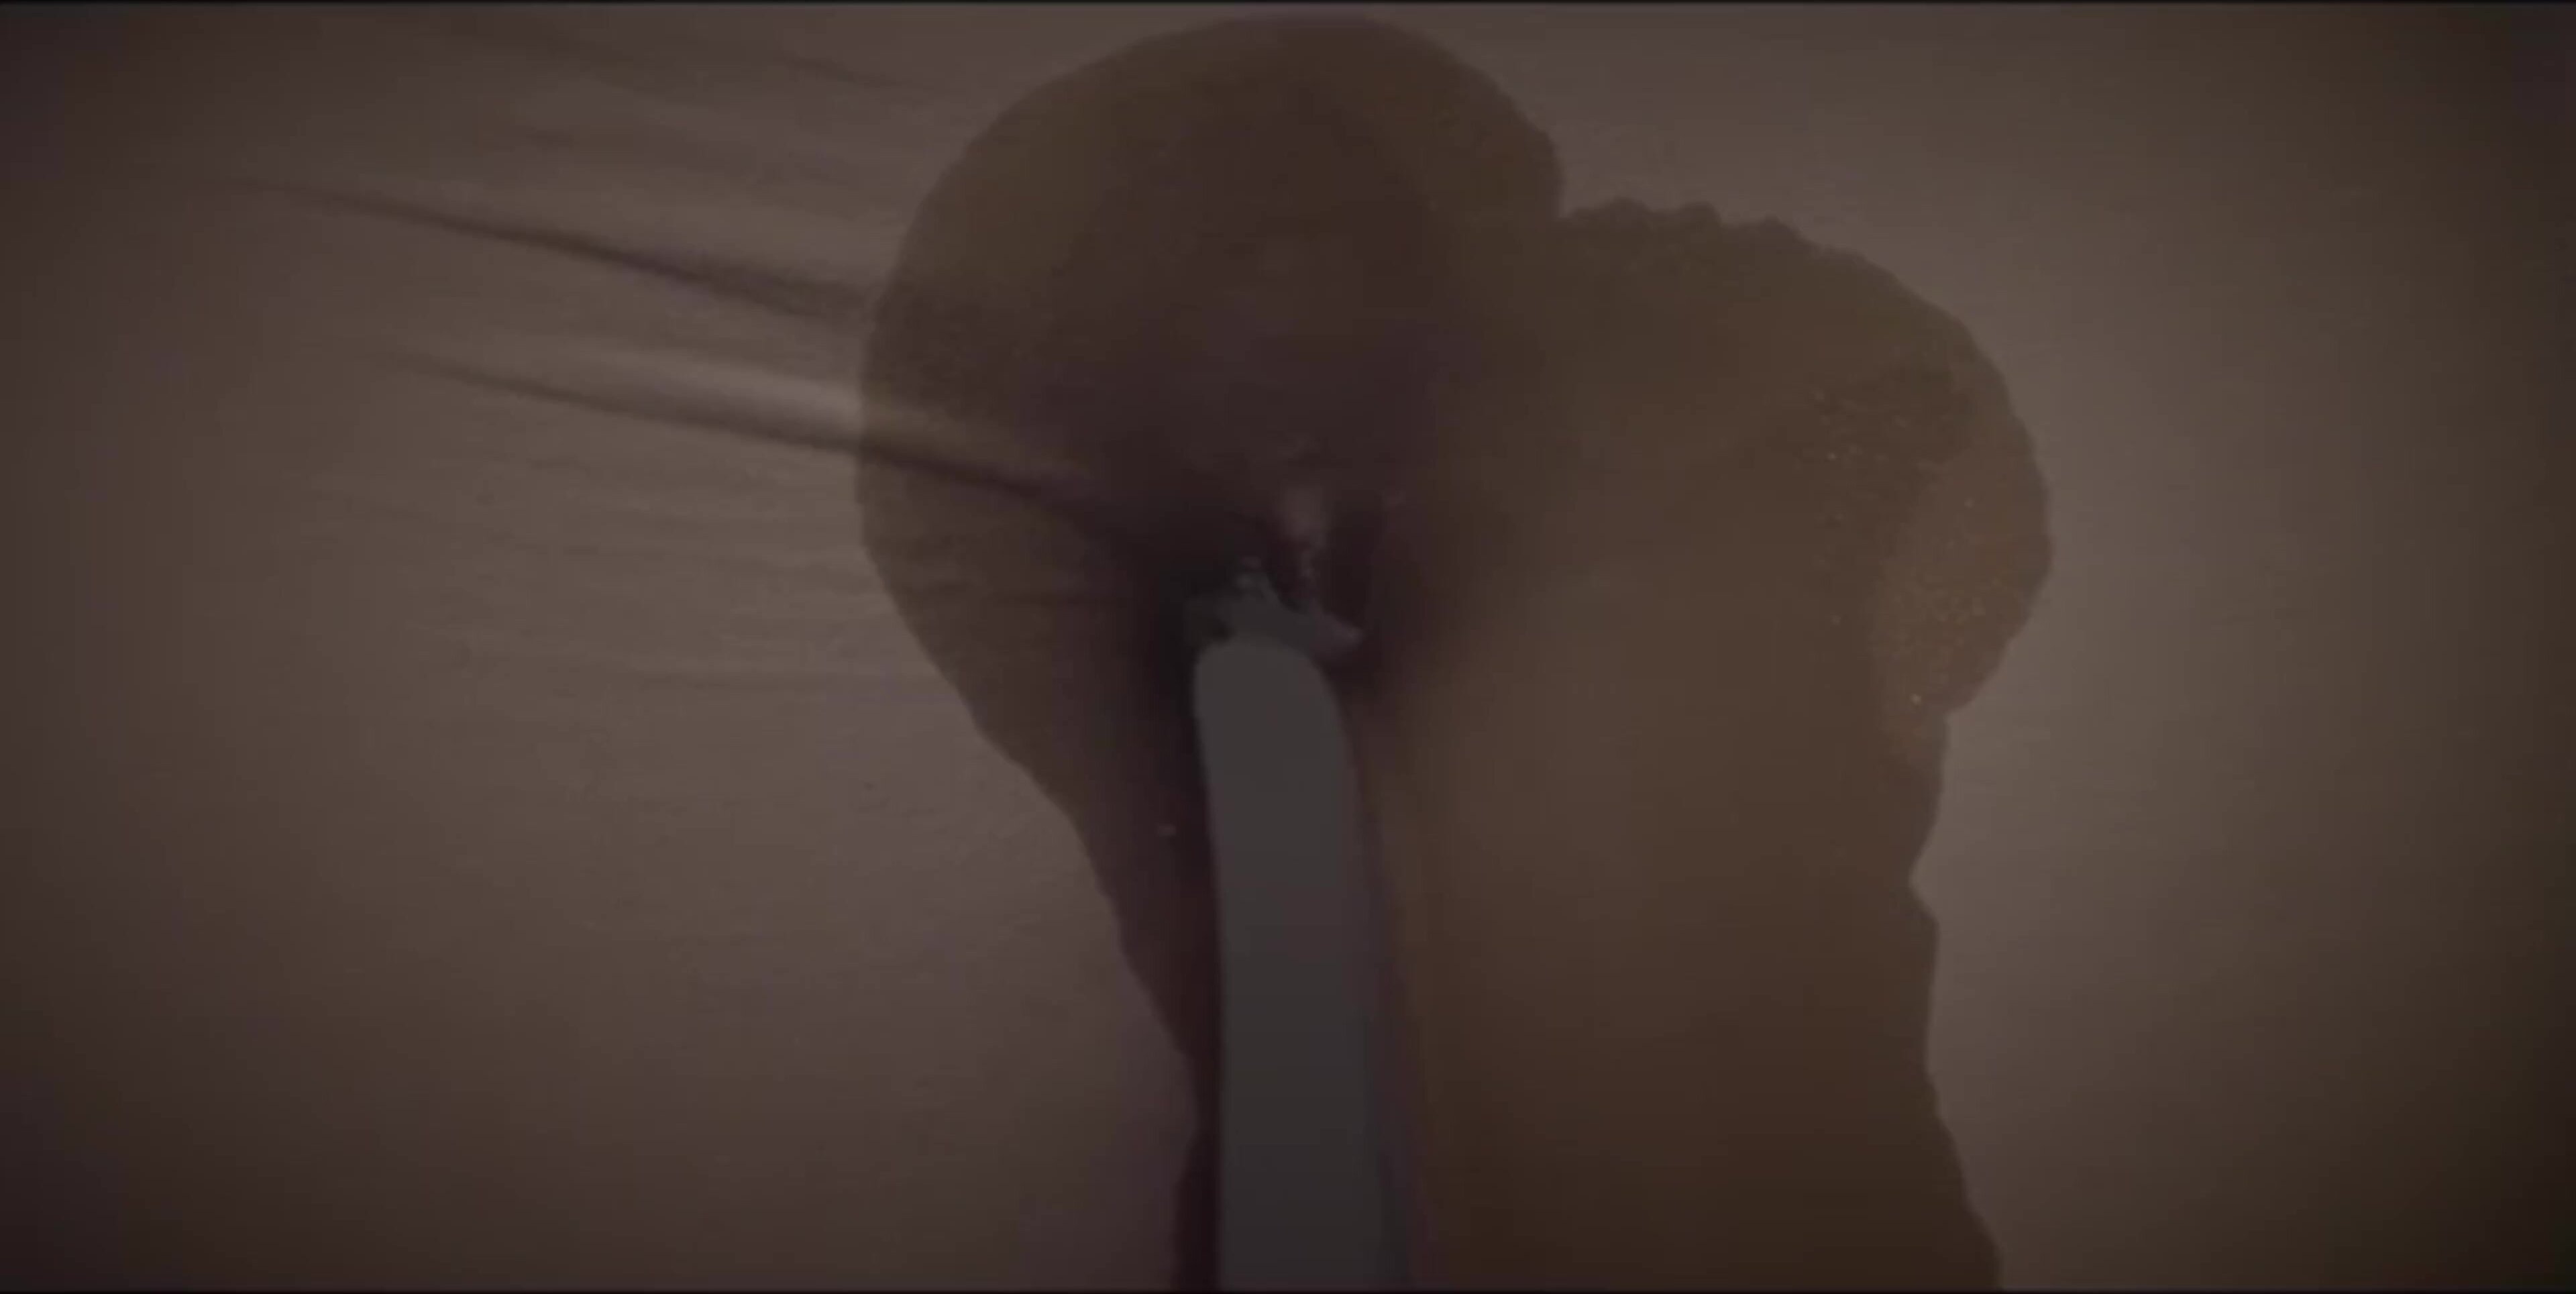 A wetting scene from a music video